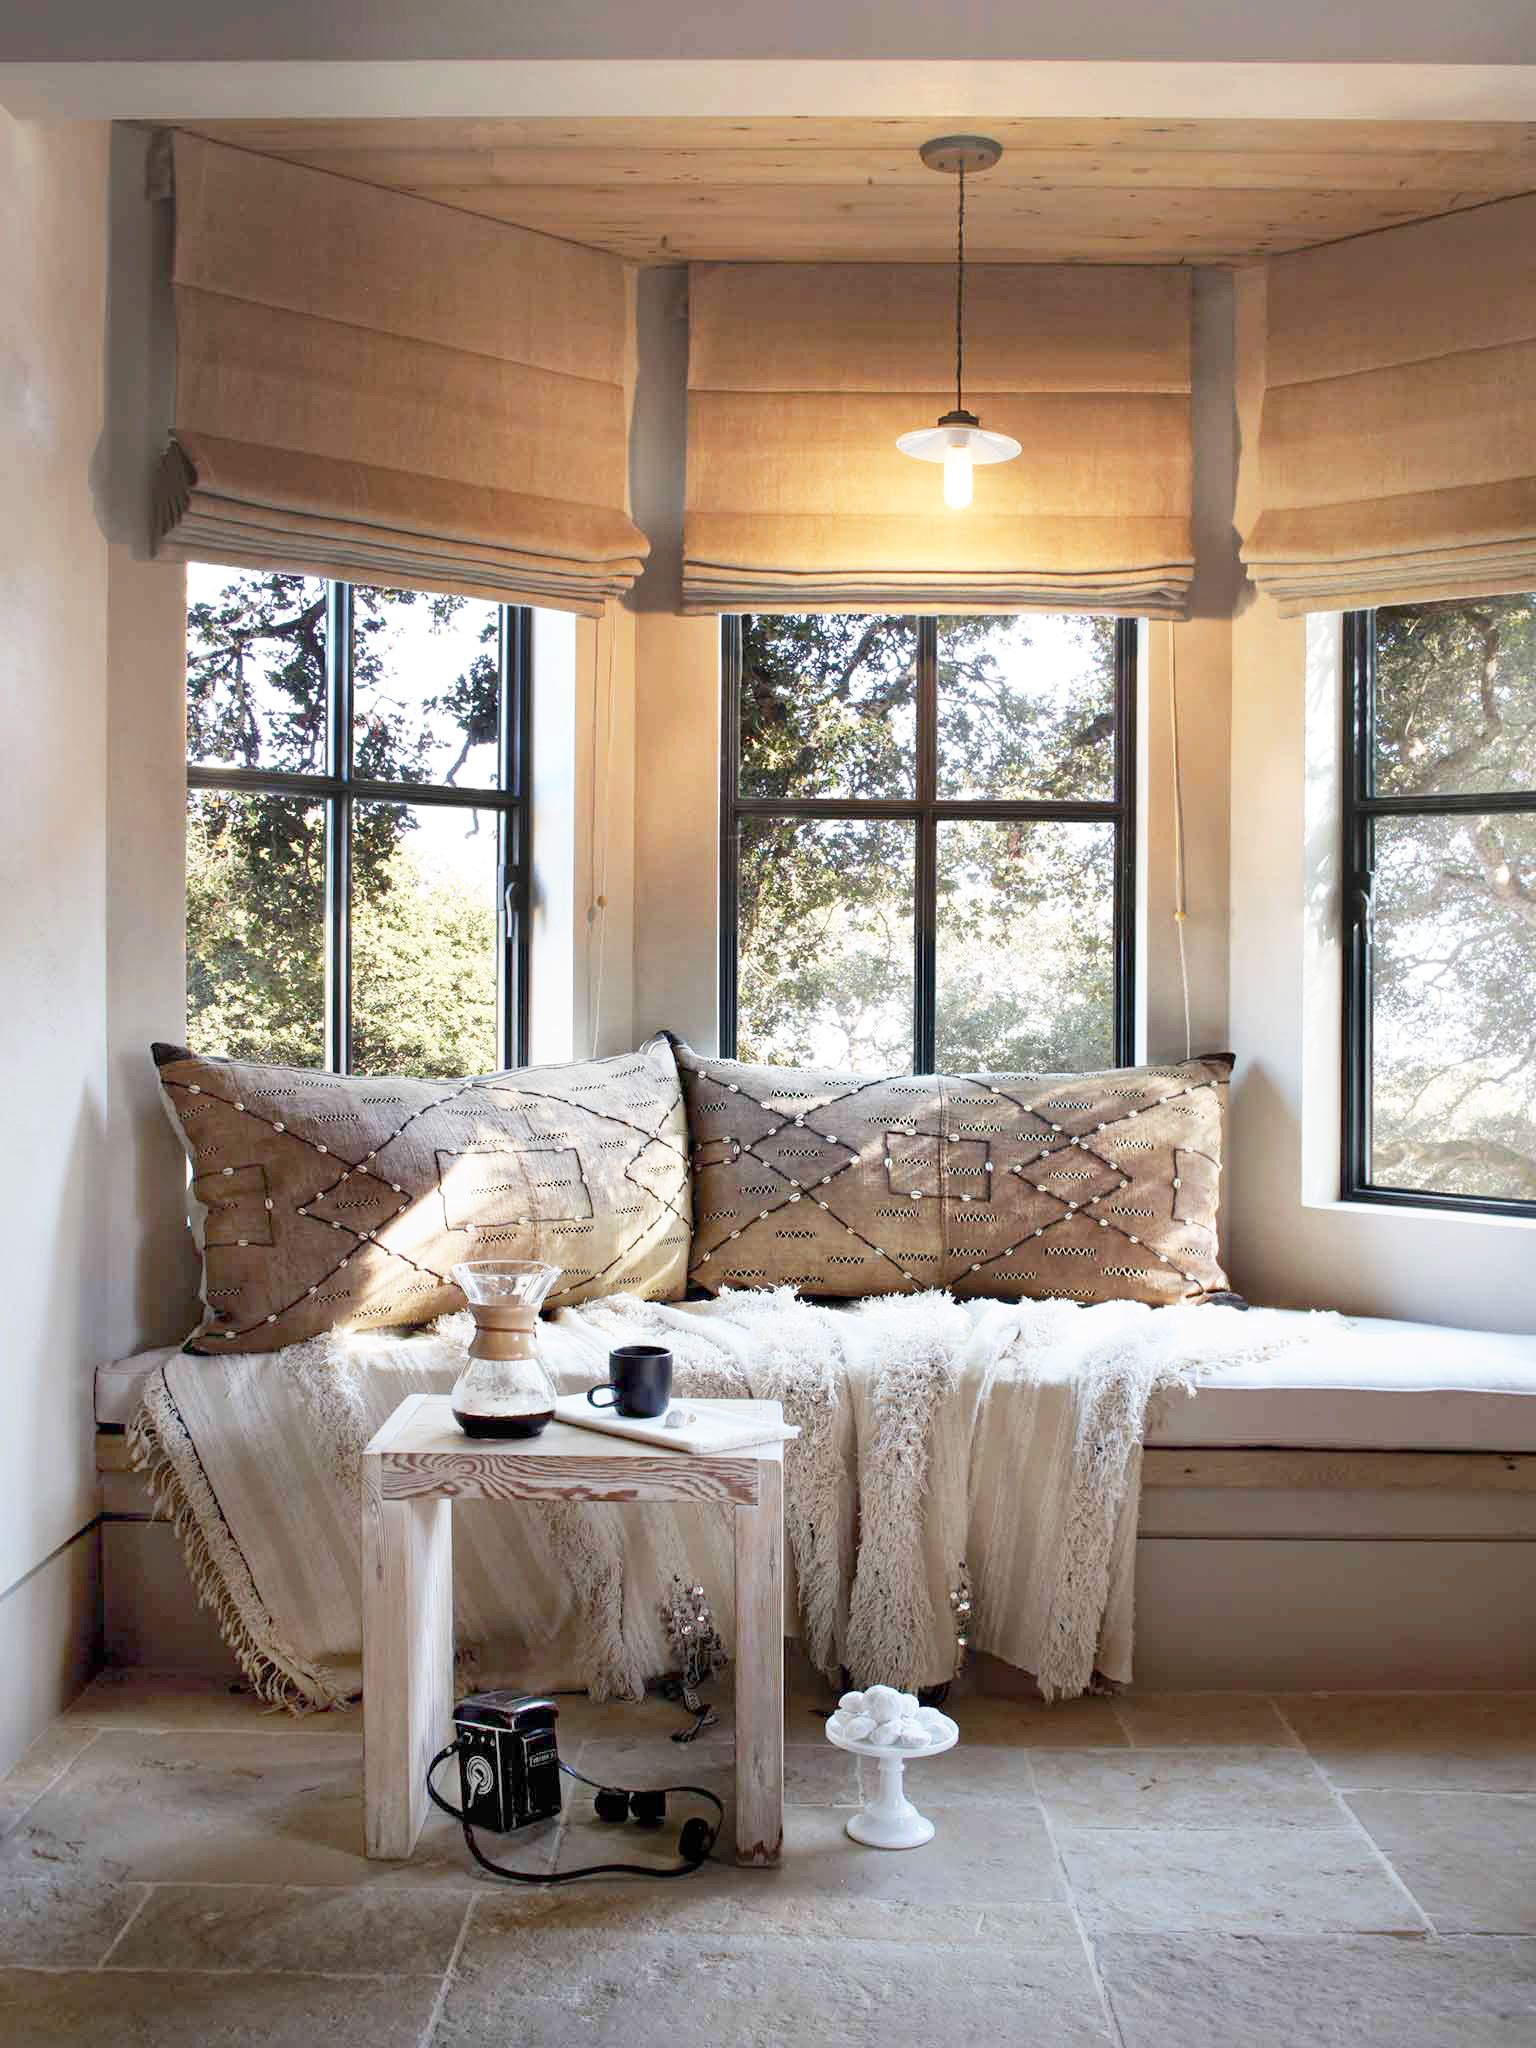 7 Use a window seat to allow you to fit in a dining space